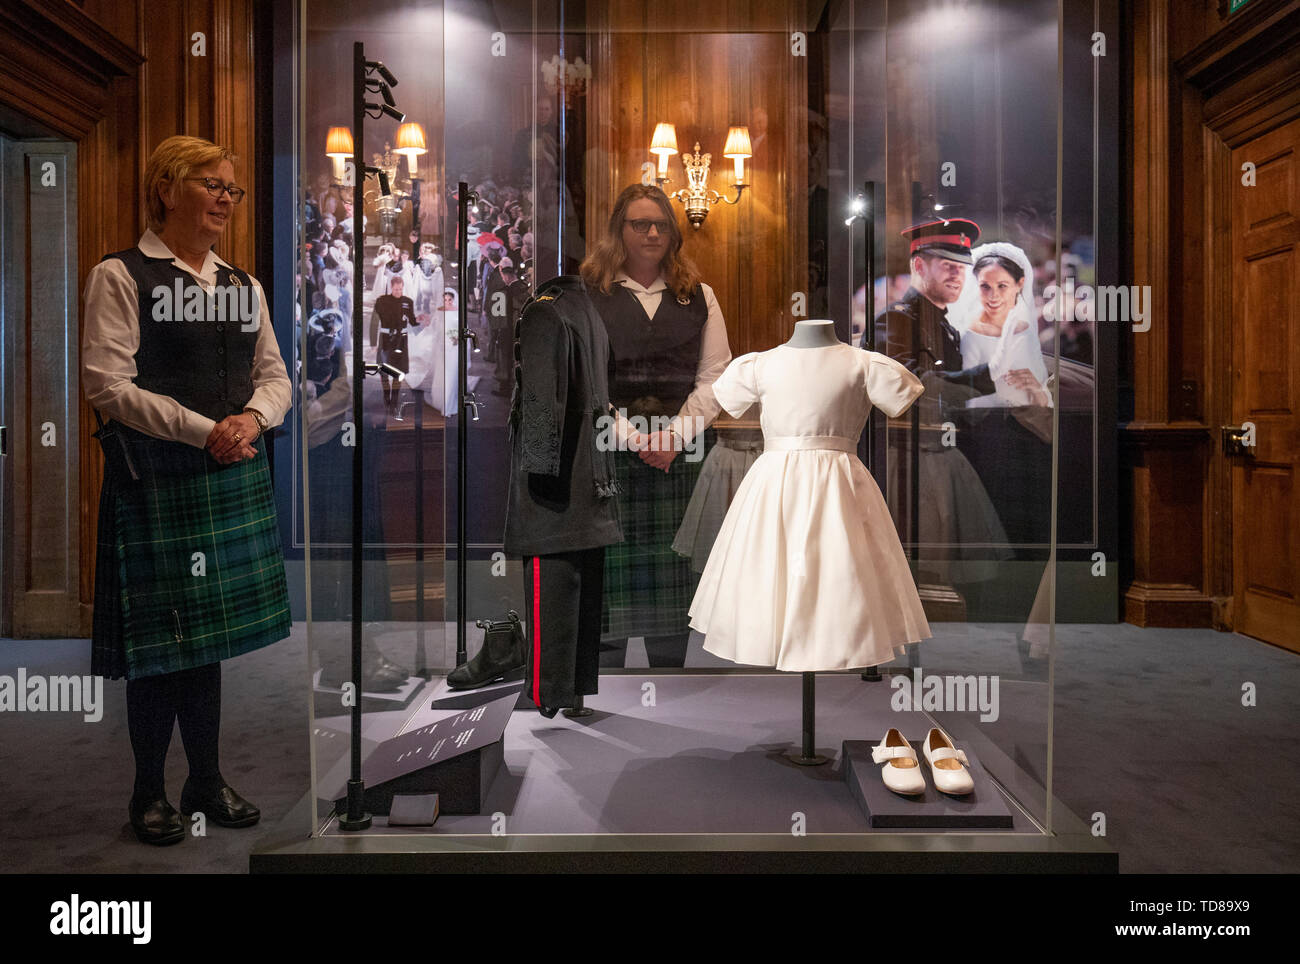 Wardens Carol Schrender (left) and Catriona Bellis take a closer look at the wedding outfits worn by Prince George and Princess Charlotte that feature in a special exhibition 'A Royal Wedding: The Duke and Duchess of Sussex' which also features a display of their Royal Highnesses' wedding outfits at the Palace of Holyroodhouse, Edinburgh. The exhibition will open to the public on Friday June 14, 2019. Stock Photo